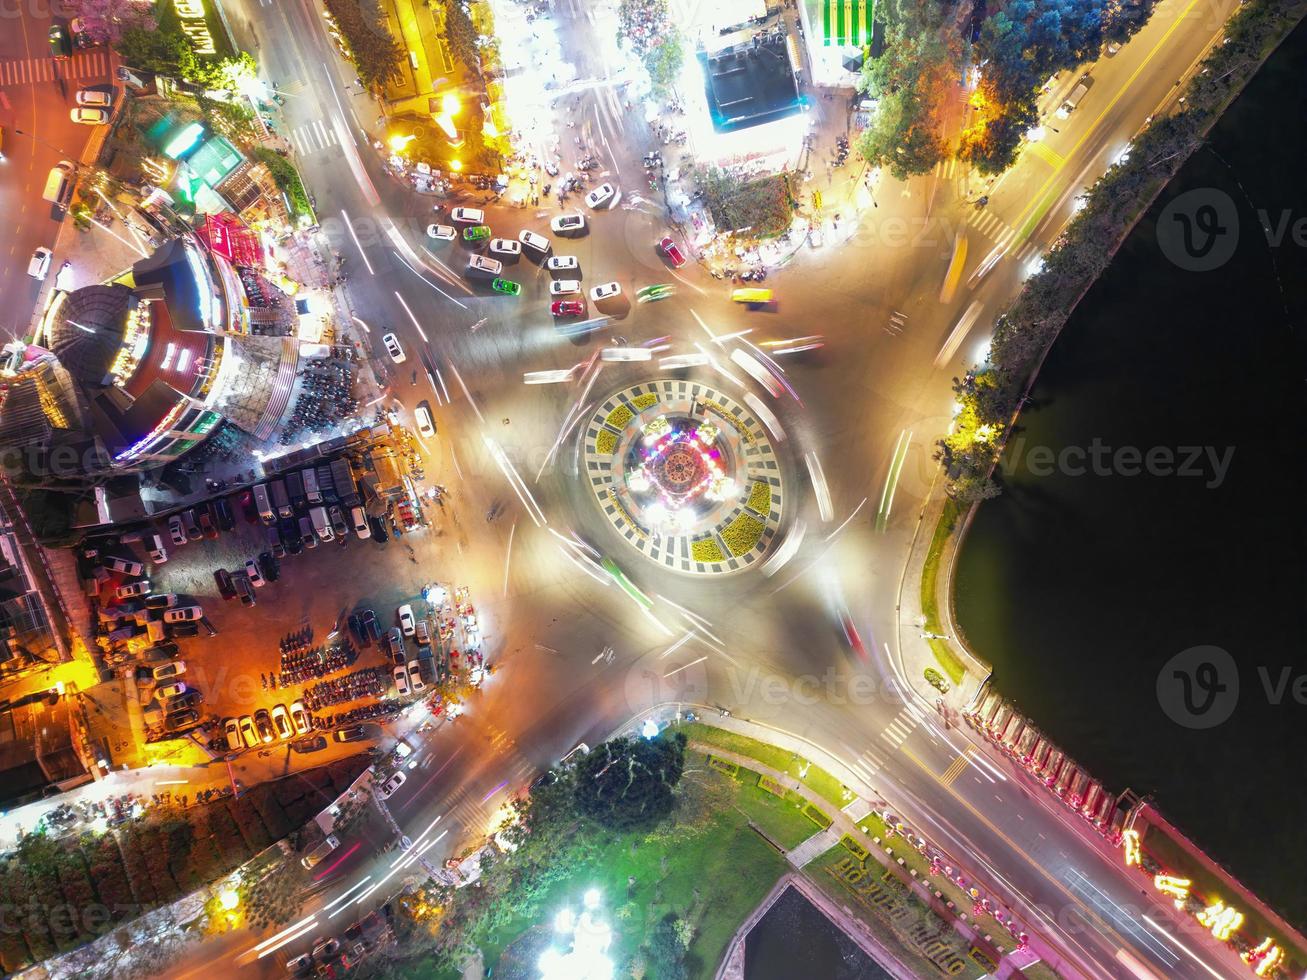 Captivating Timelapse of Nighttime Traffic in Da Lat City, Vietnam A Mesmerizing View of Roundabout, Vehicles and City Lights in Motion photo